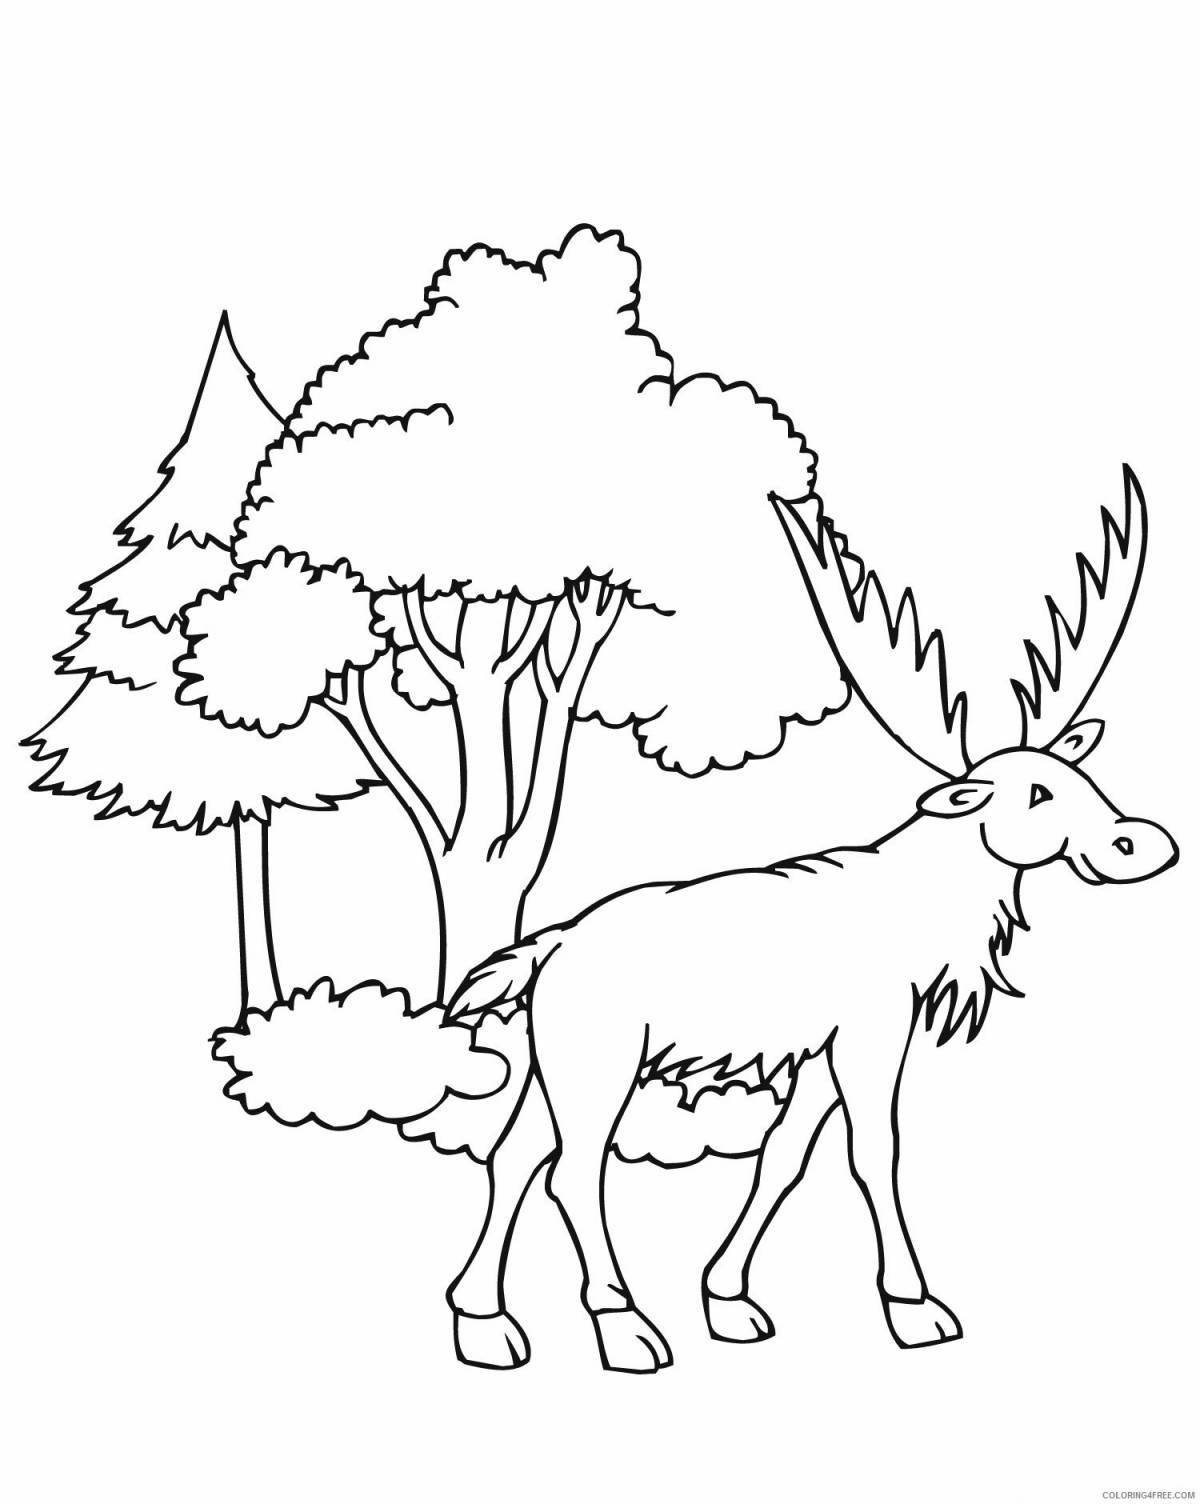 Unforgettable elk coloring book for kids 6-7 years old